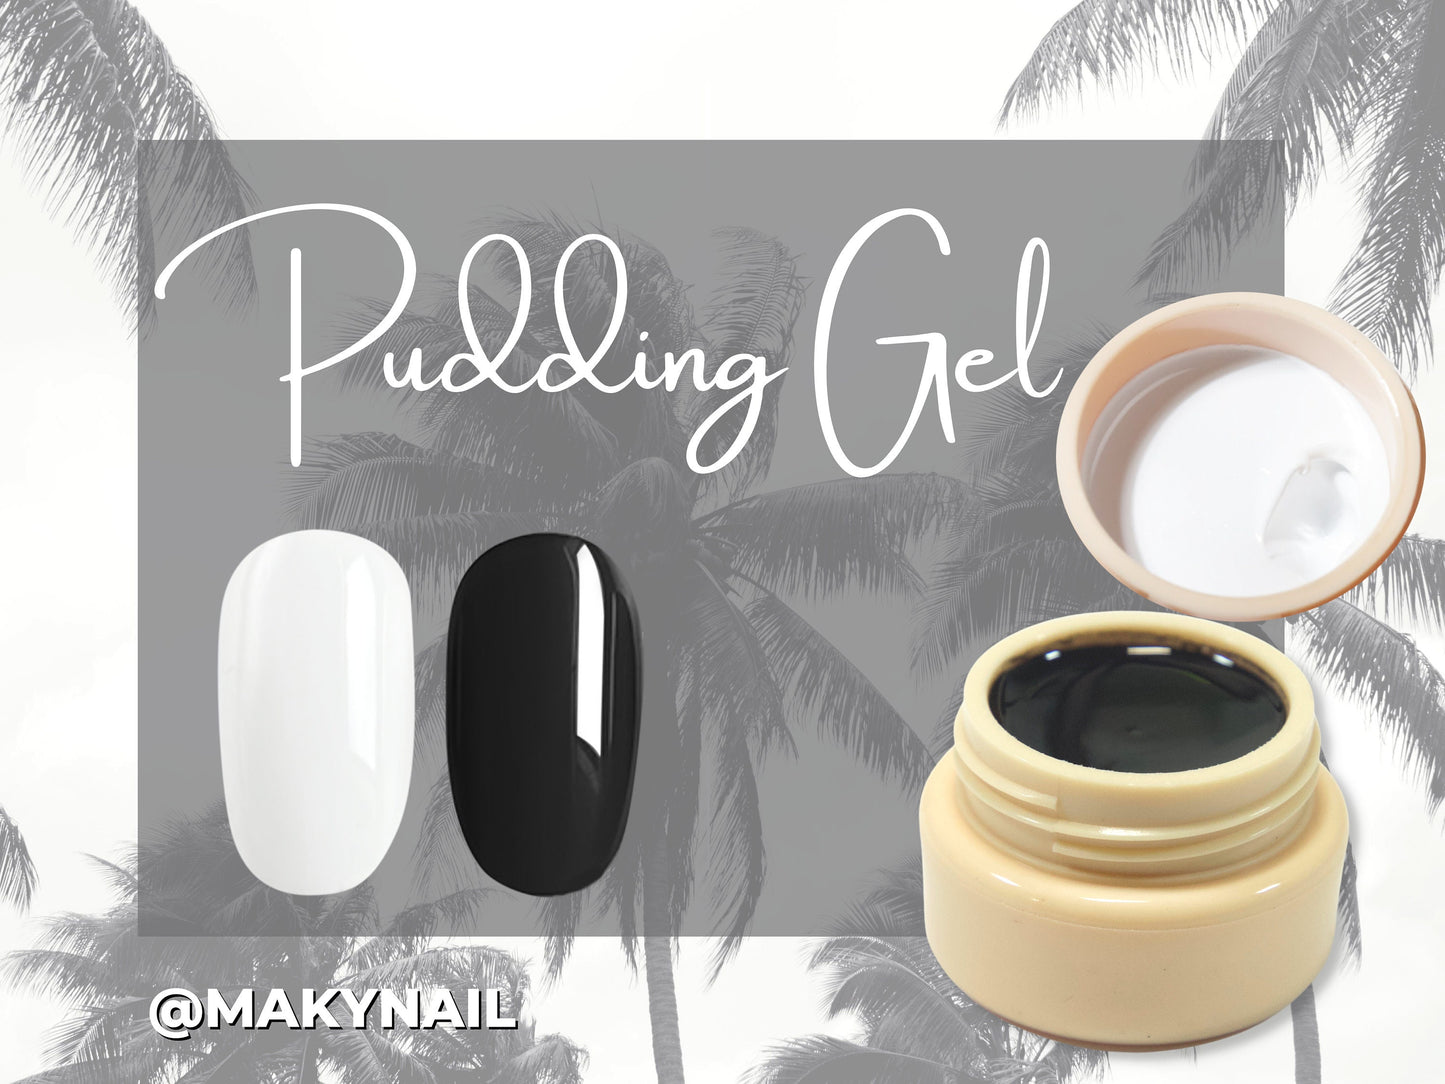 5g Solid Jelly UV Gel Nail Art /Black & White Nails Pudding UV Gels Creamy gel supply Manicure Pedicure Nails Design